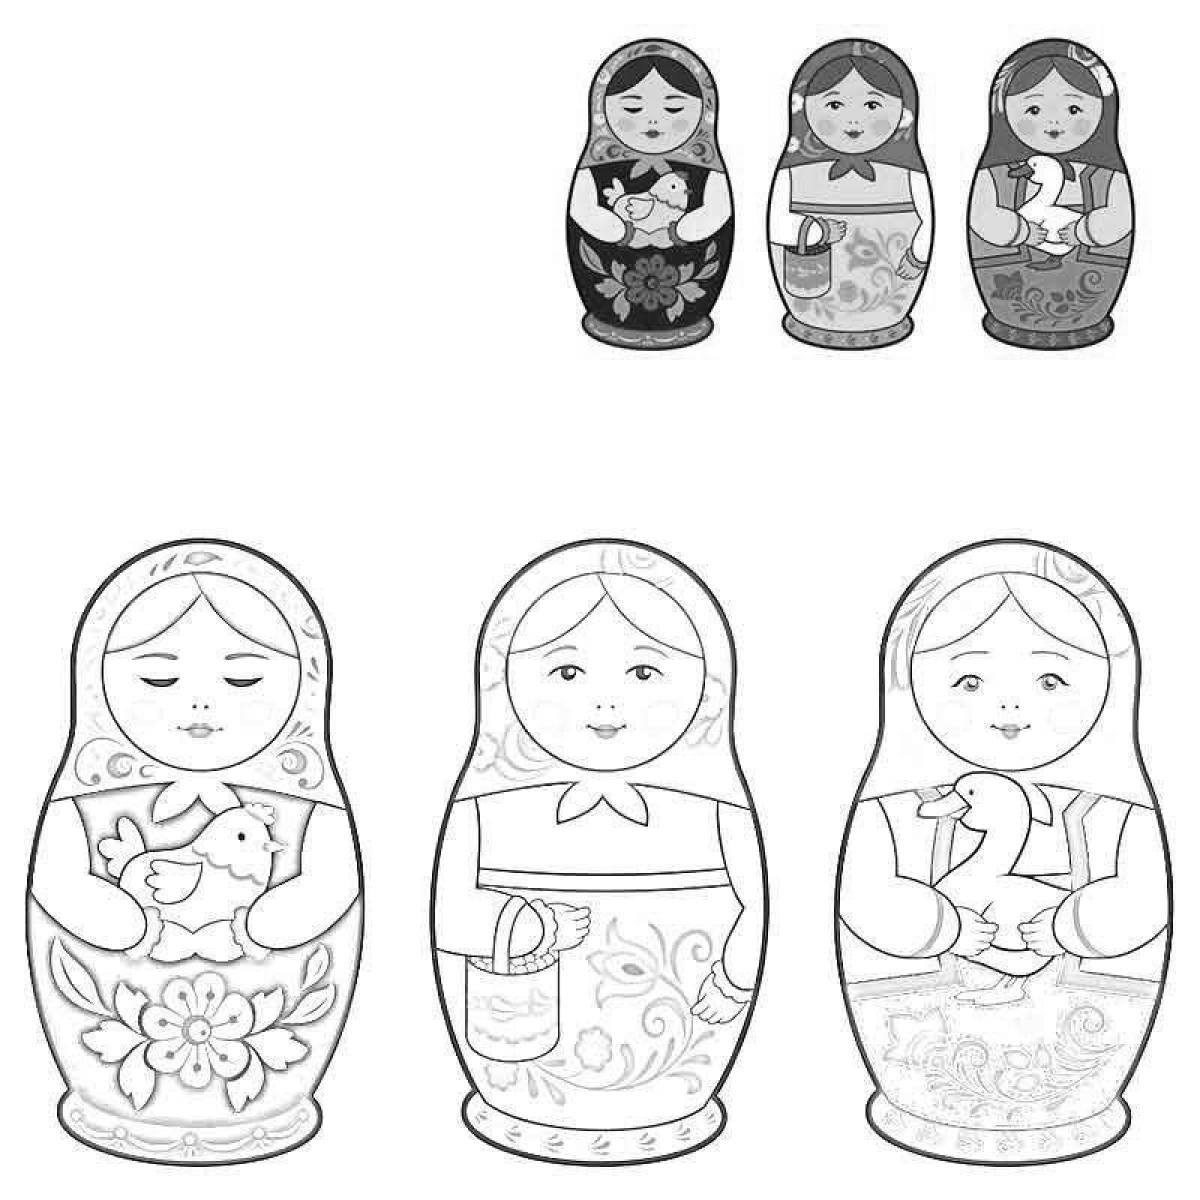 Sweet matryoshka coloring book for children 3-4 years old